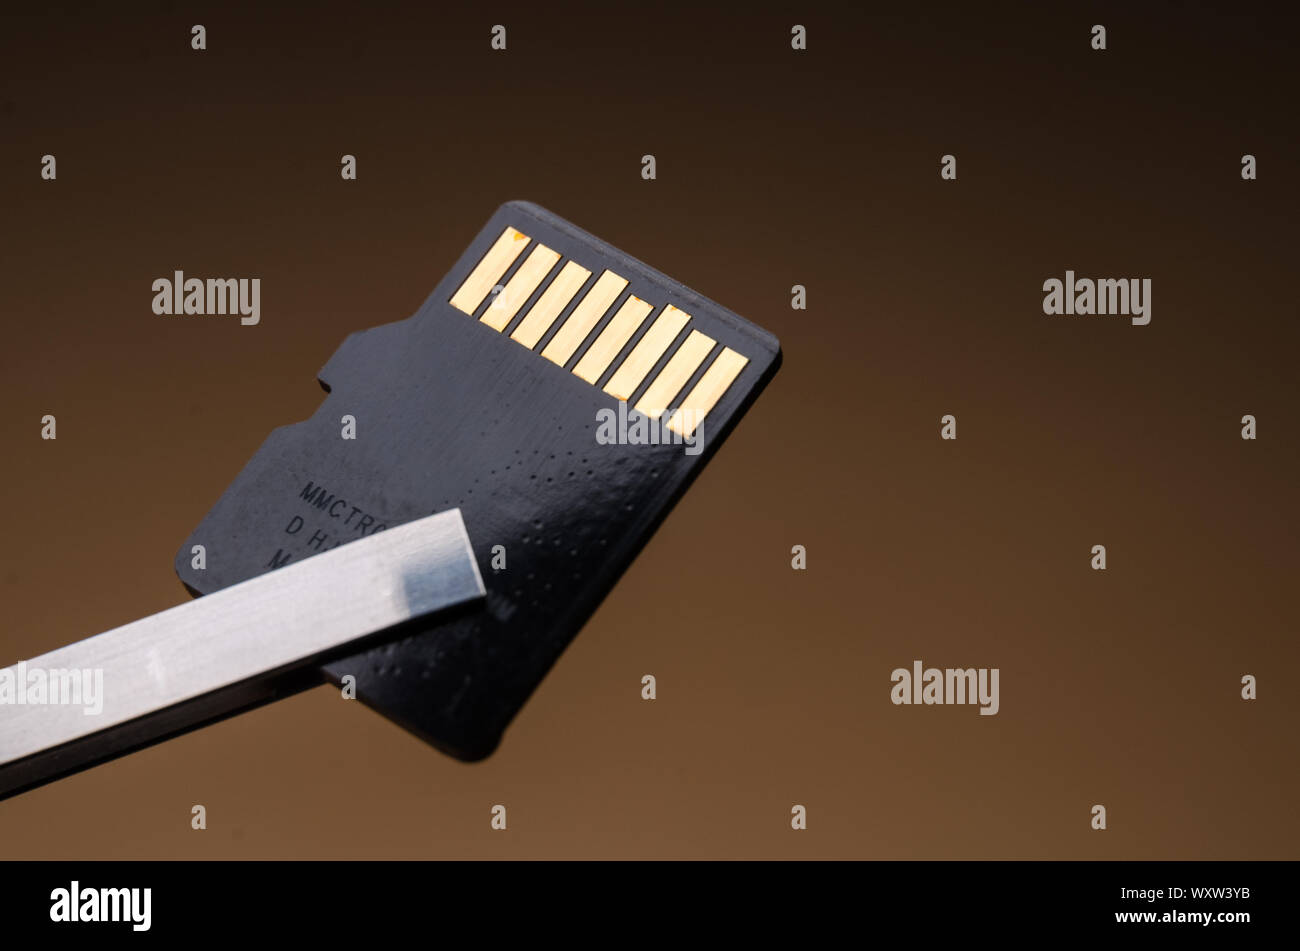 Close-up of tweezers holding a micro SD Memory Card Stock Photo